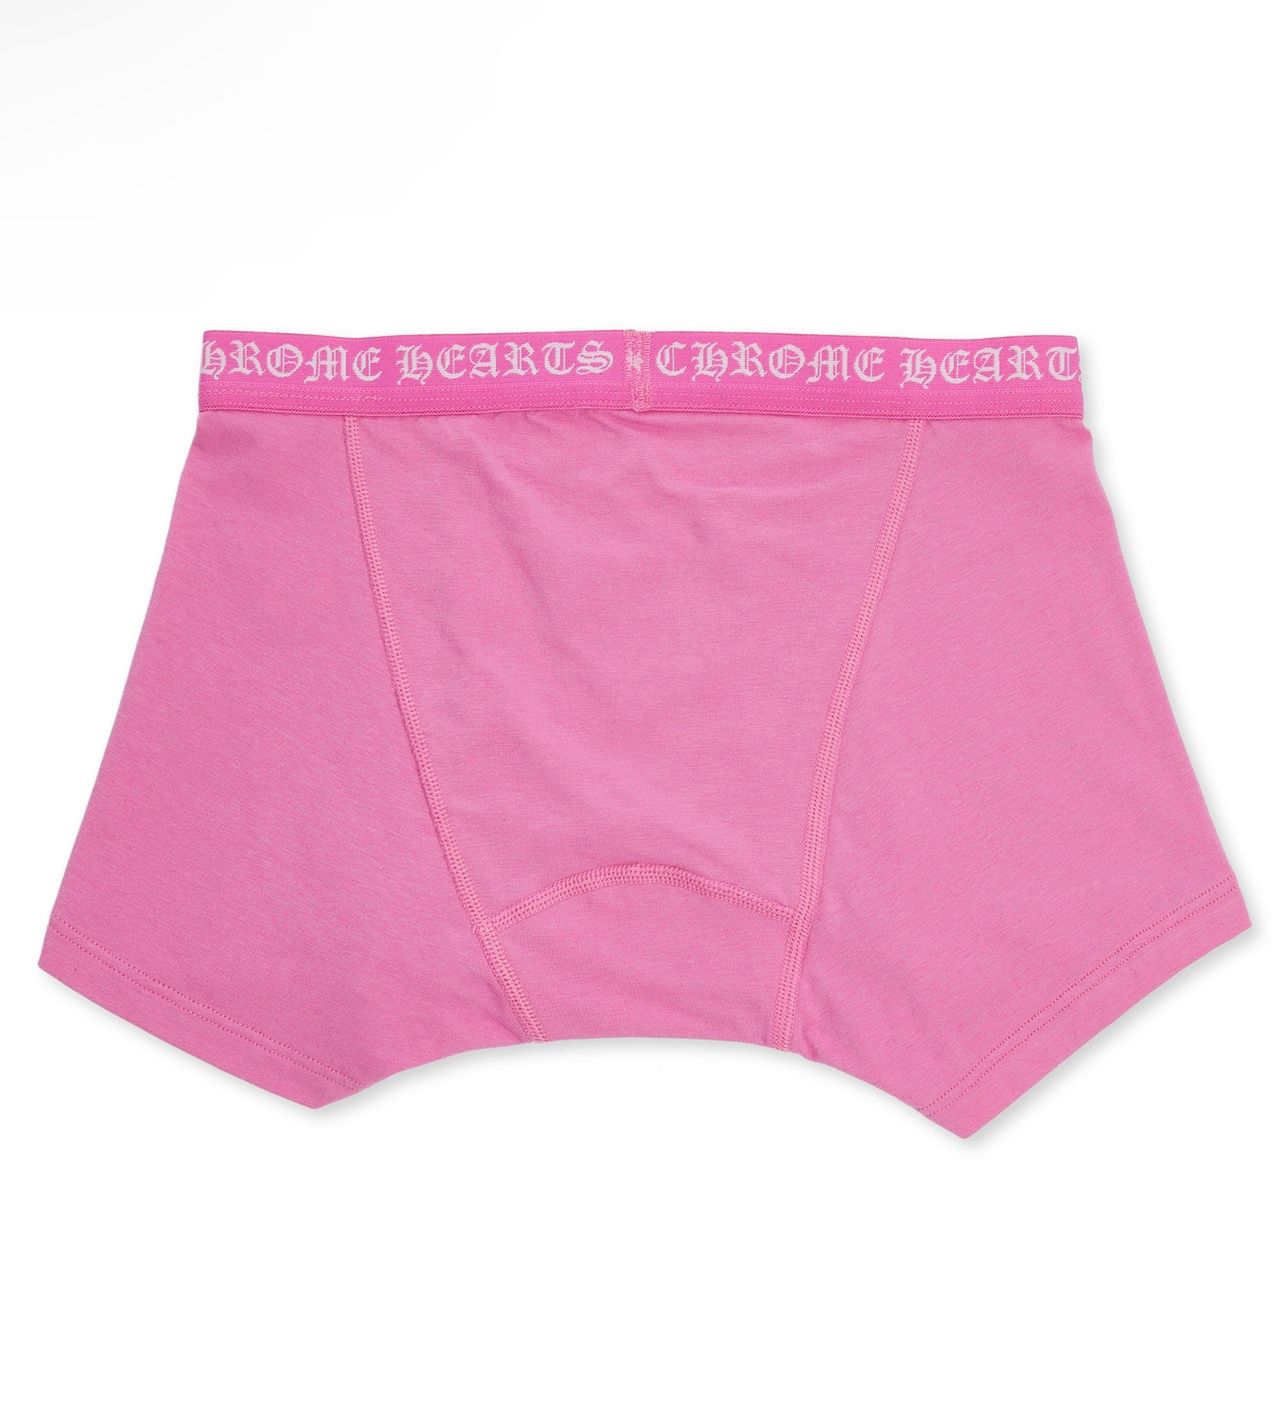 Chrome Hearts Medium Pink Chrome Hearts Boxer Brief Size 30 - 2 Preview